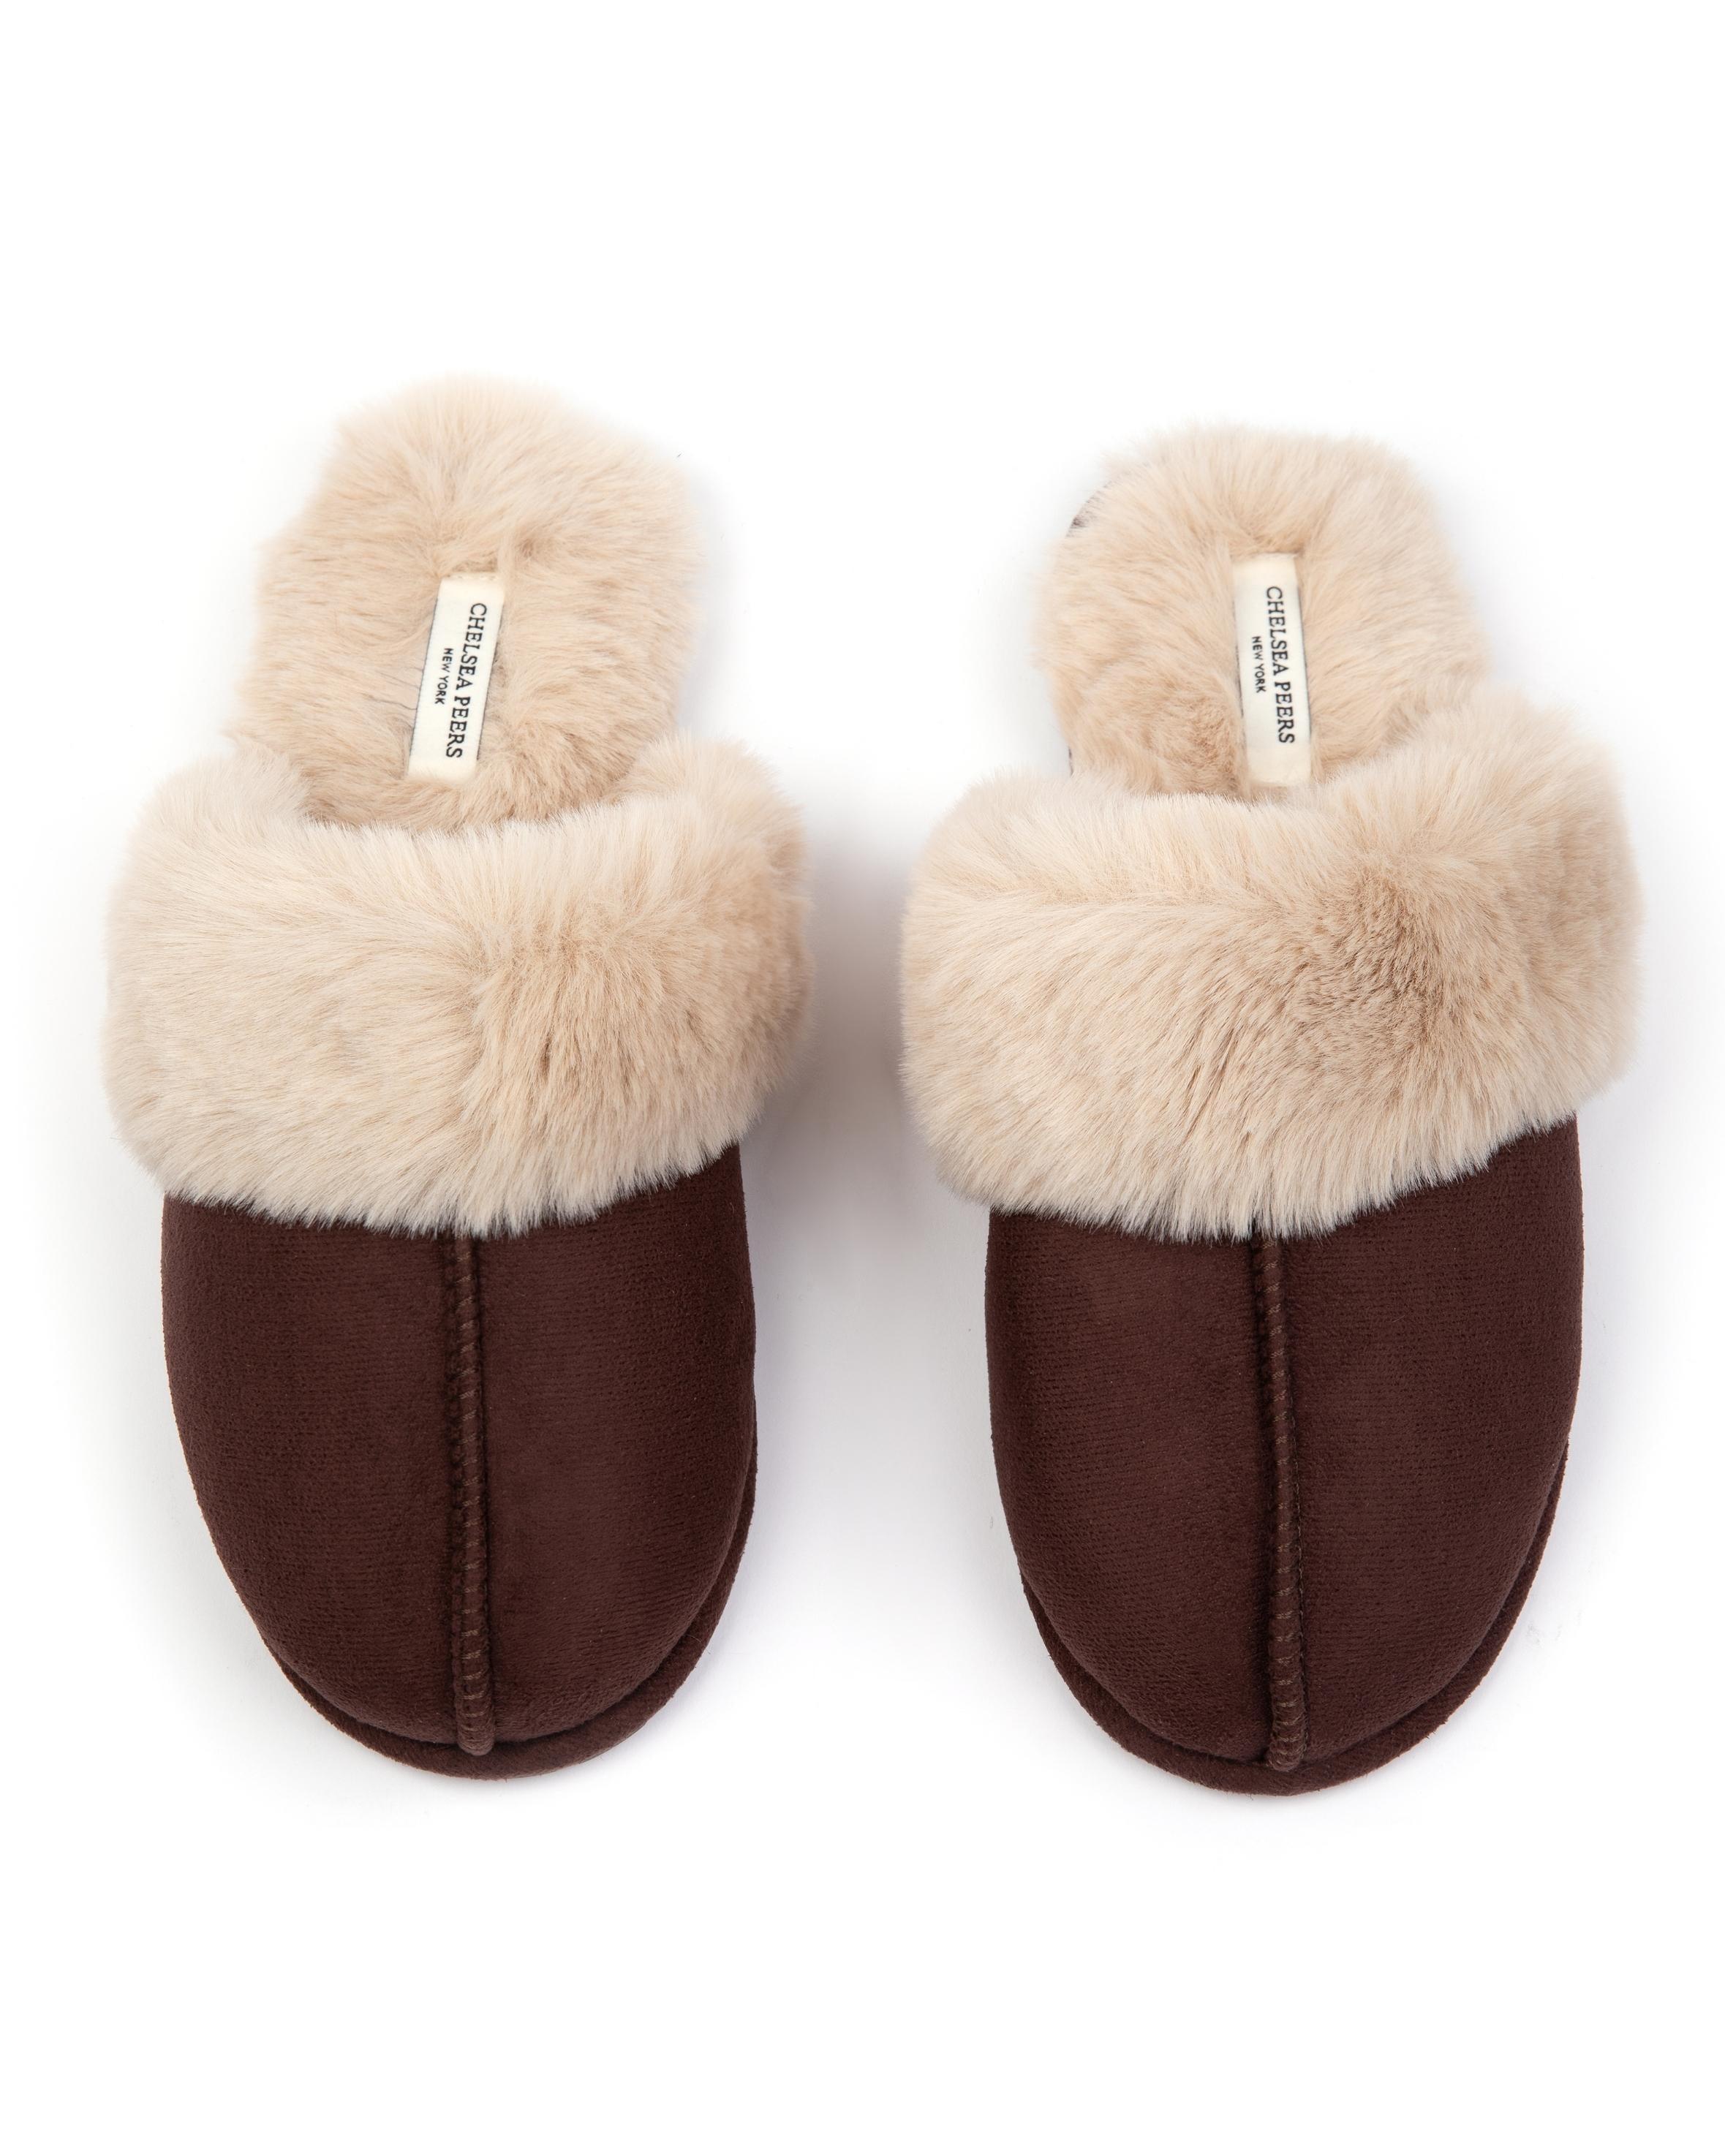 Chelsea Peers NYC Suedette Chocolate Cuffed Dome Slippers in Natural | Lyst